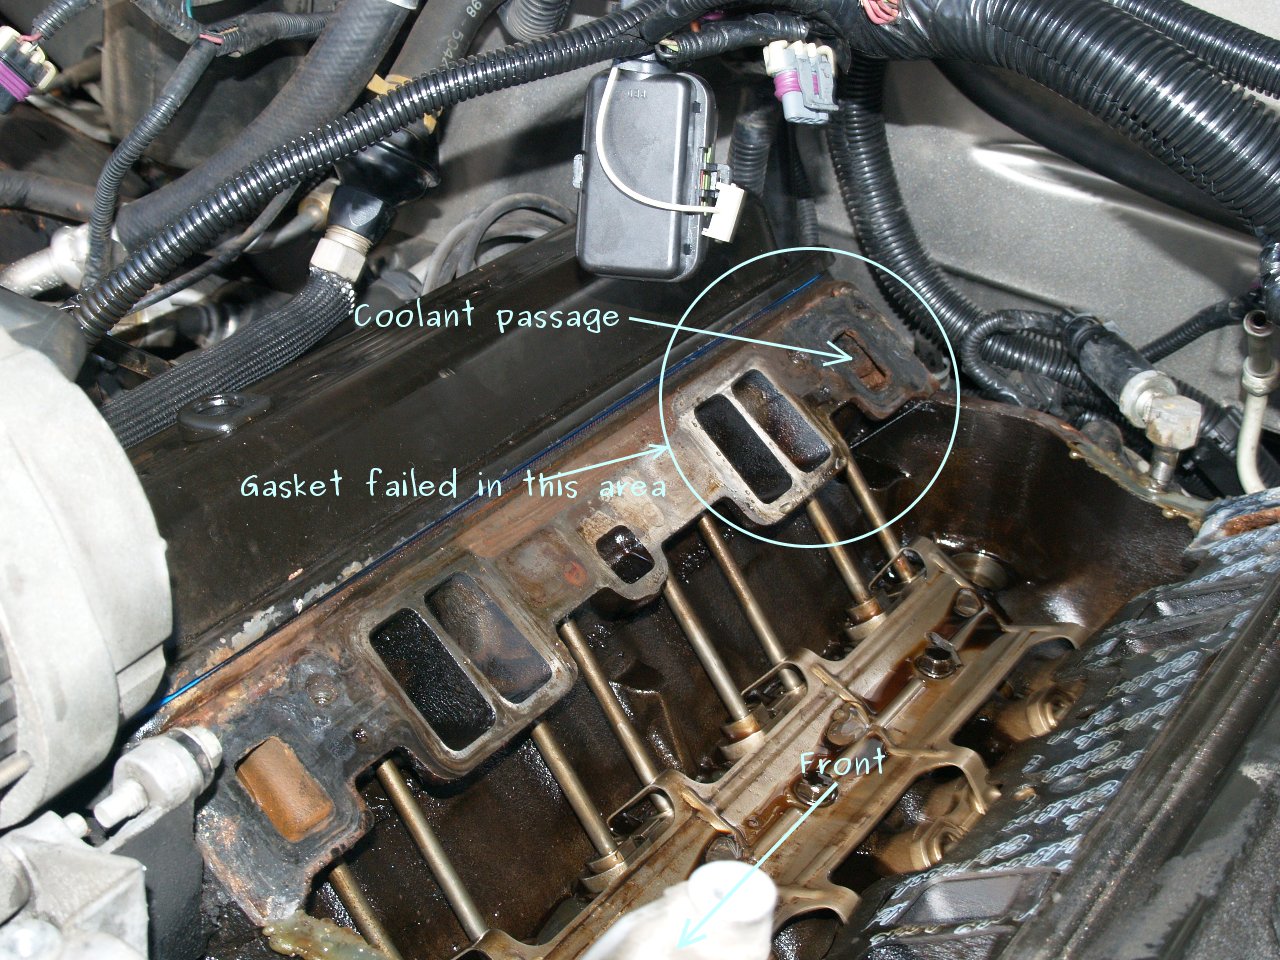 See P032A in engine